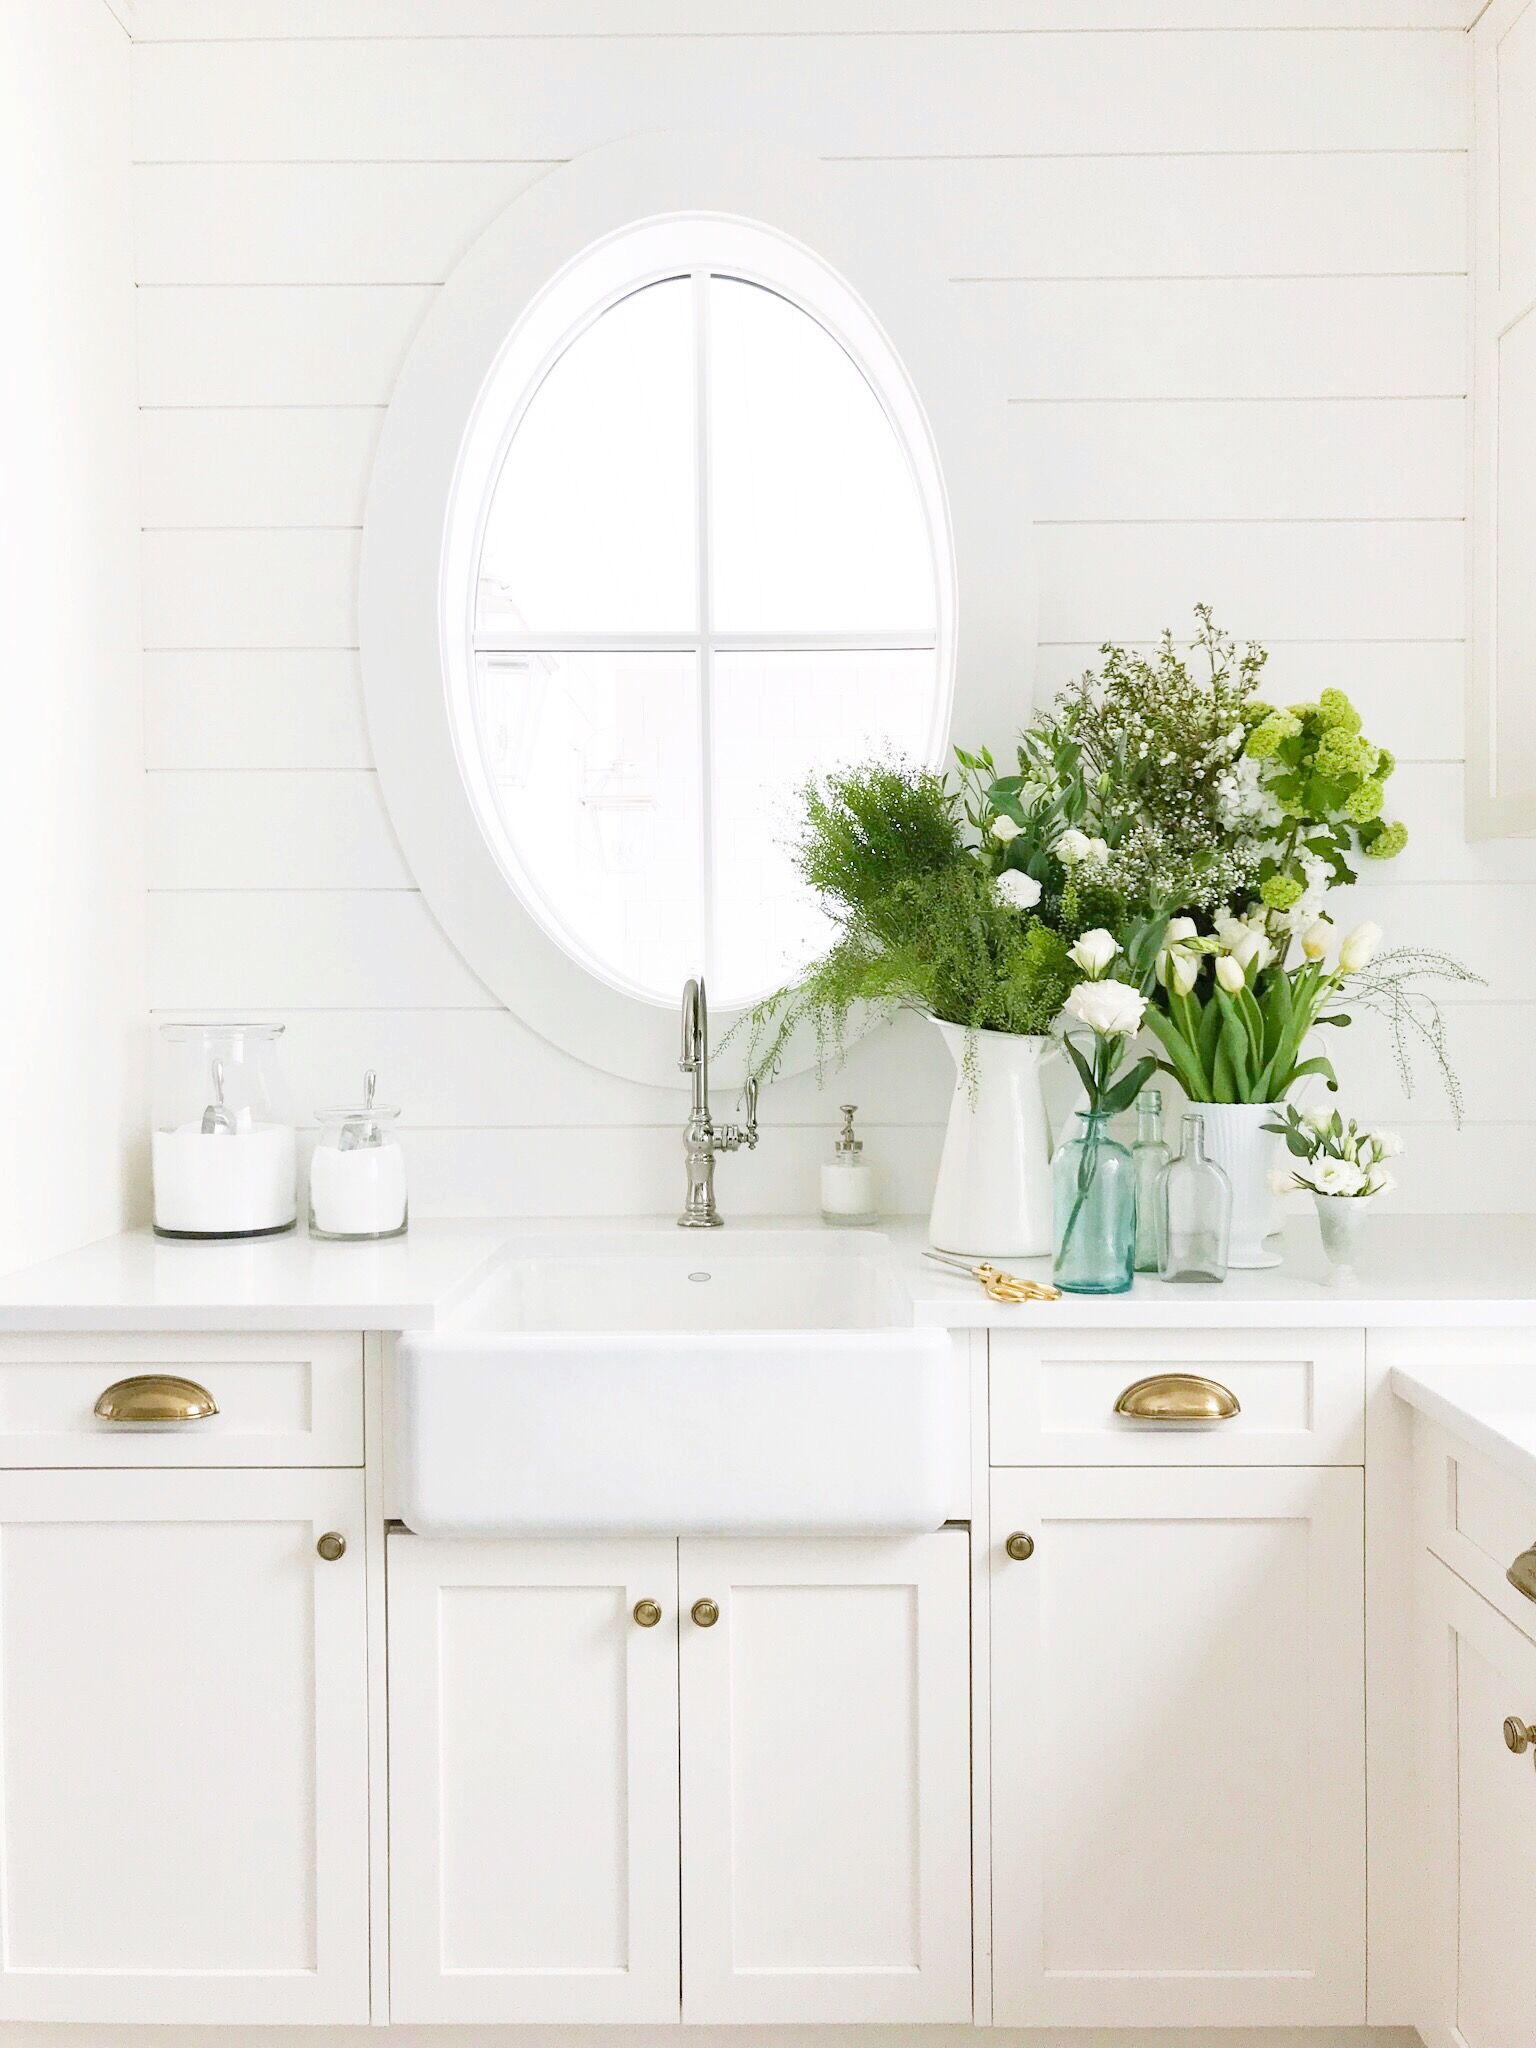 Crisp white laundry room filled with green and white flowers perfect for St. Patrick's Day!